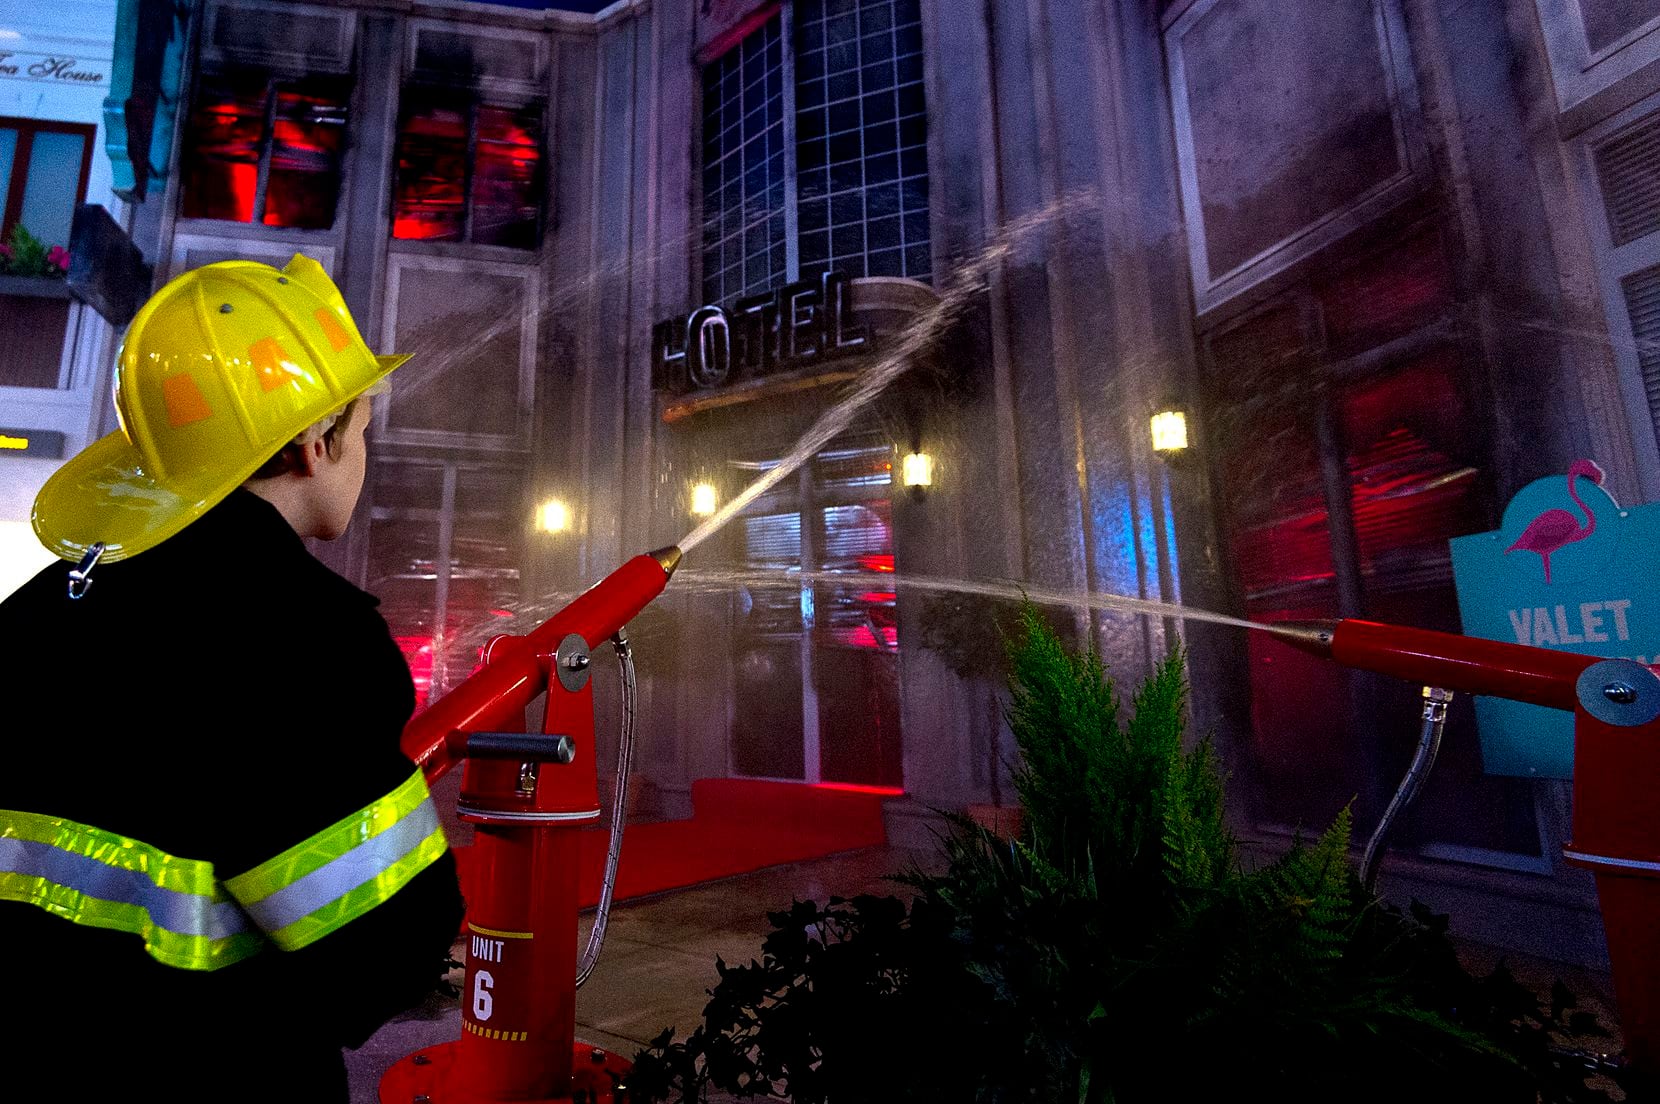 Kids can pretend to be firefighters at the KidZania in London shown here in 2015.